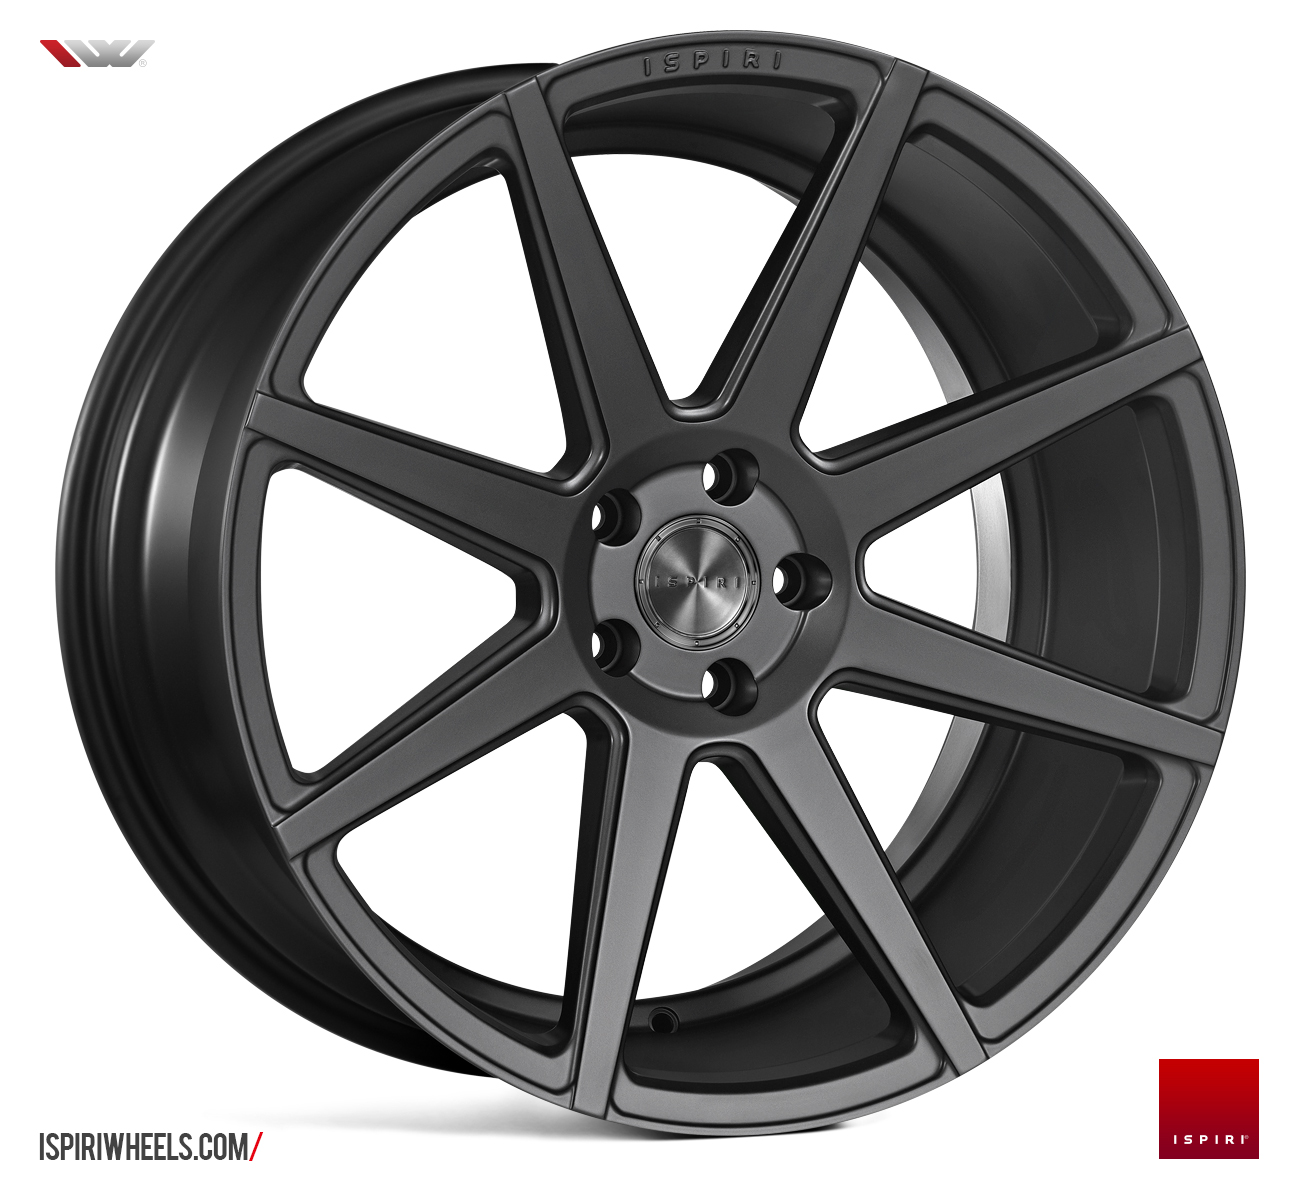 NEW 20" ISPIRI ISR8 ALLOY WHEELS IN CARBON GRAPHITE WITH DEEP CONCAVE 10.5" REARS